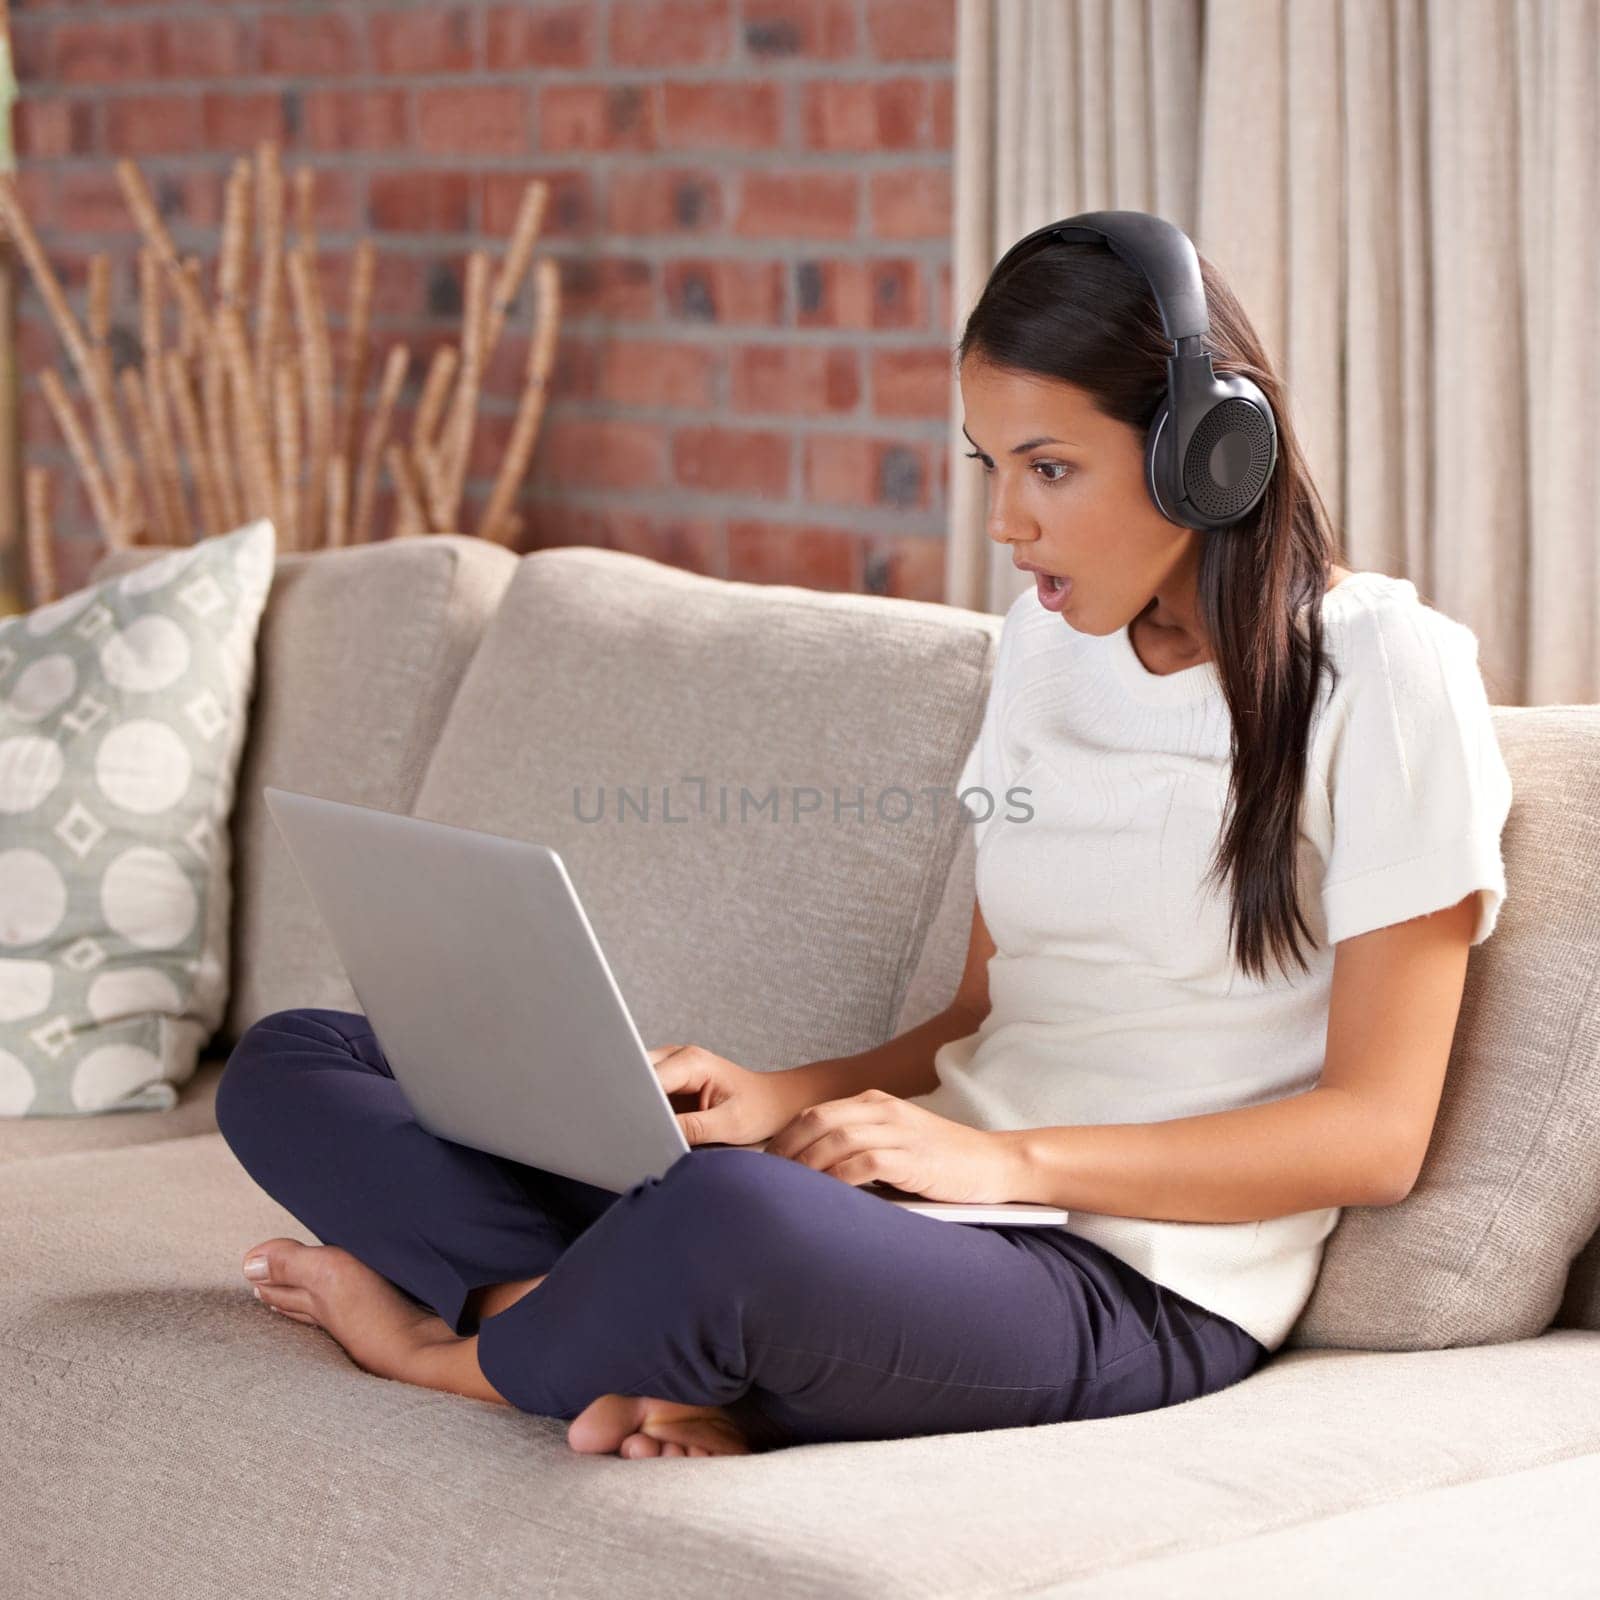 Shocked, home and woman with headphones, laptop and internet connection on sofa listening to music. Female person relax on couch to listen to wow, surprise or fake news announcement online with tech by YuriArcurs